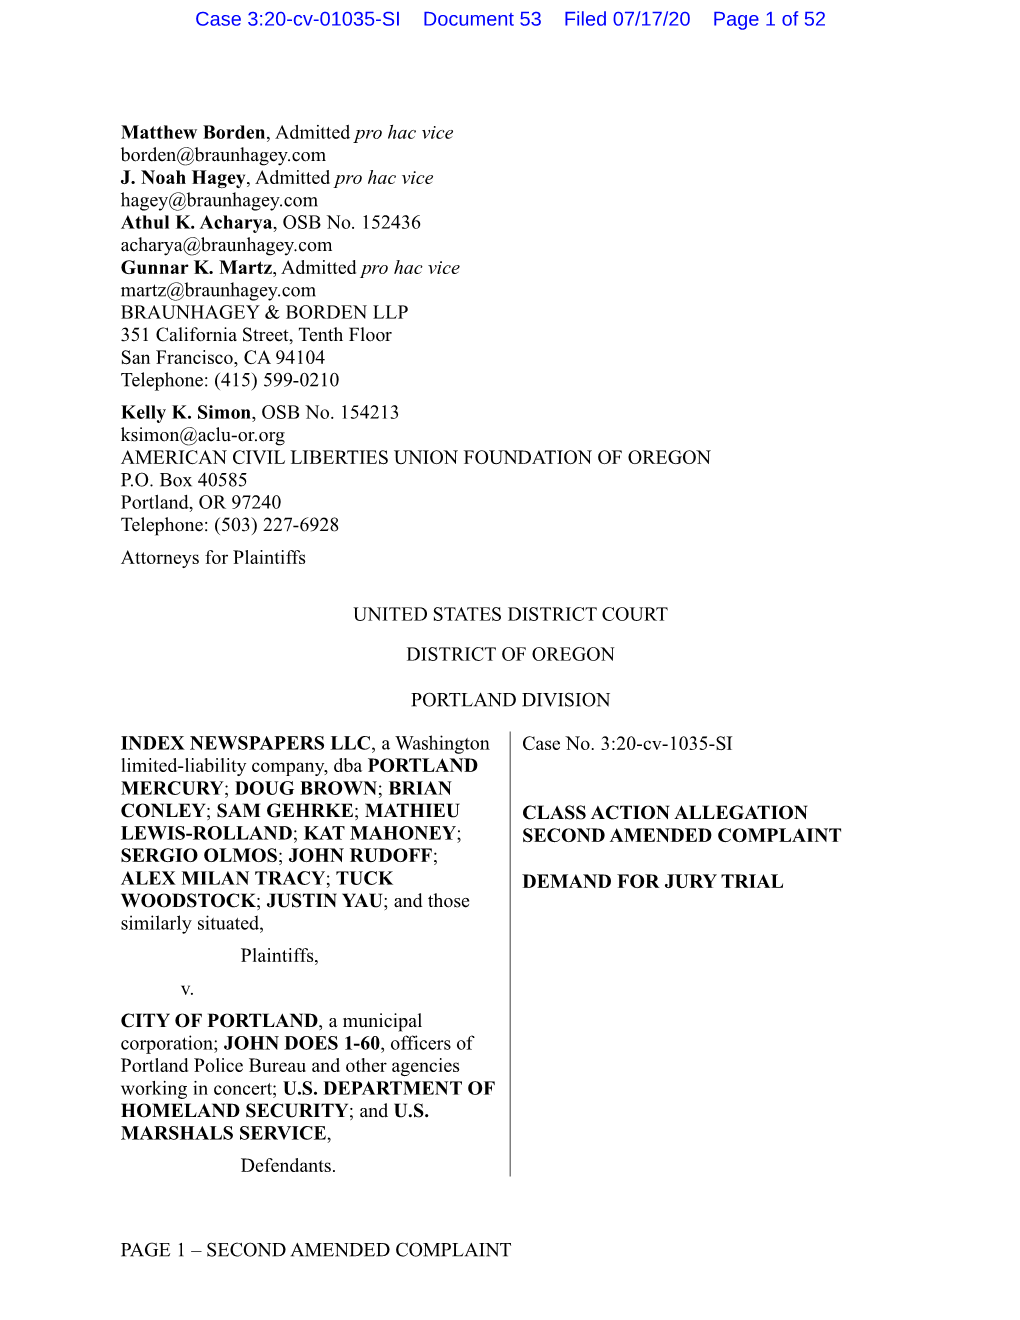 PAGE 1 – SECOND AMENDED COMPLAINT Case 3:20-Cv-01035-SI Document 53 Filed 07/17/20 Page 2 of 52